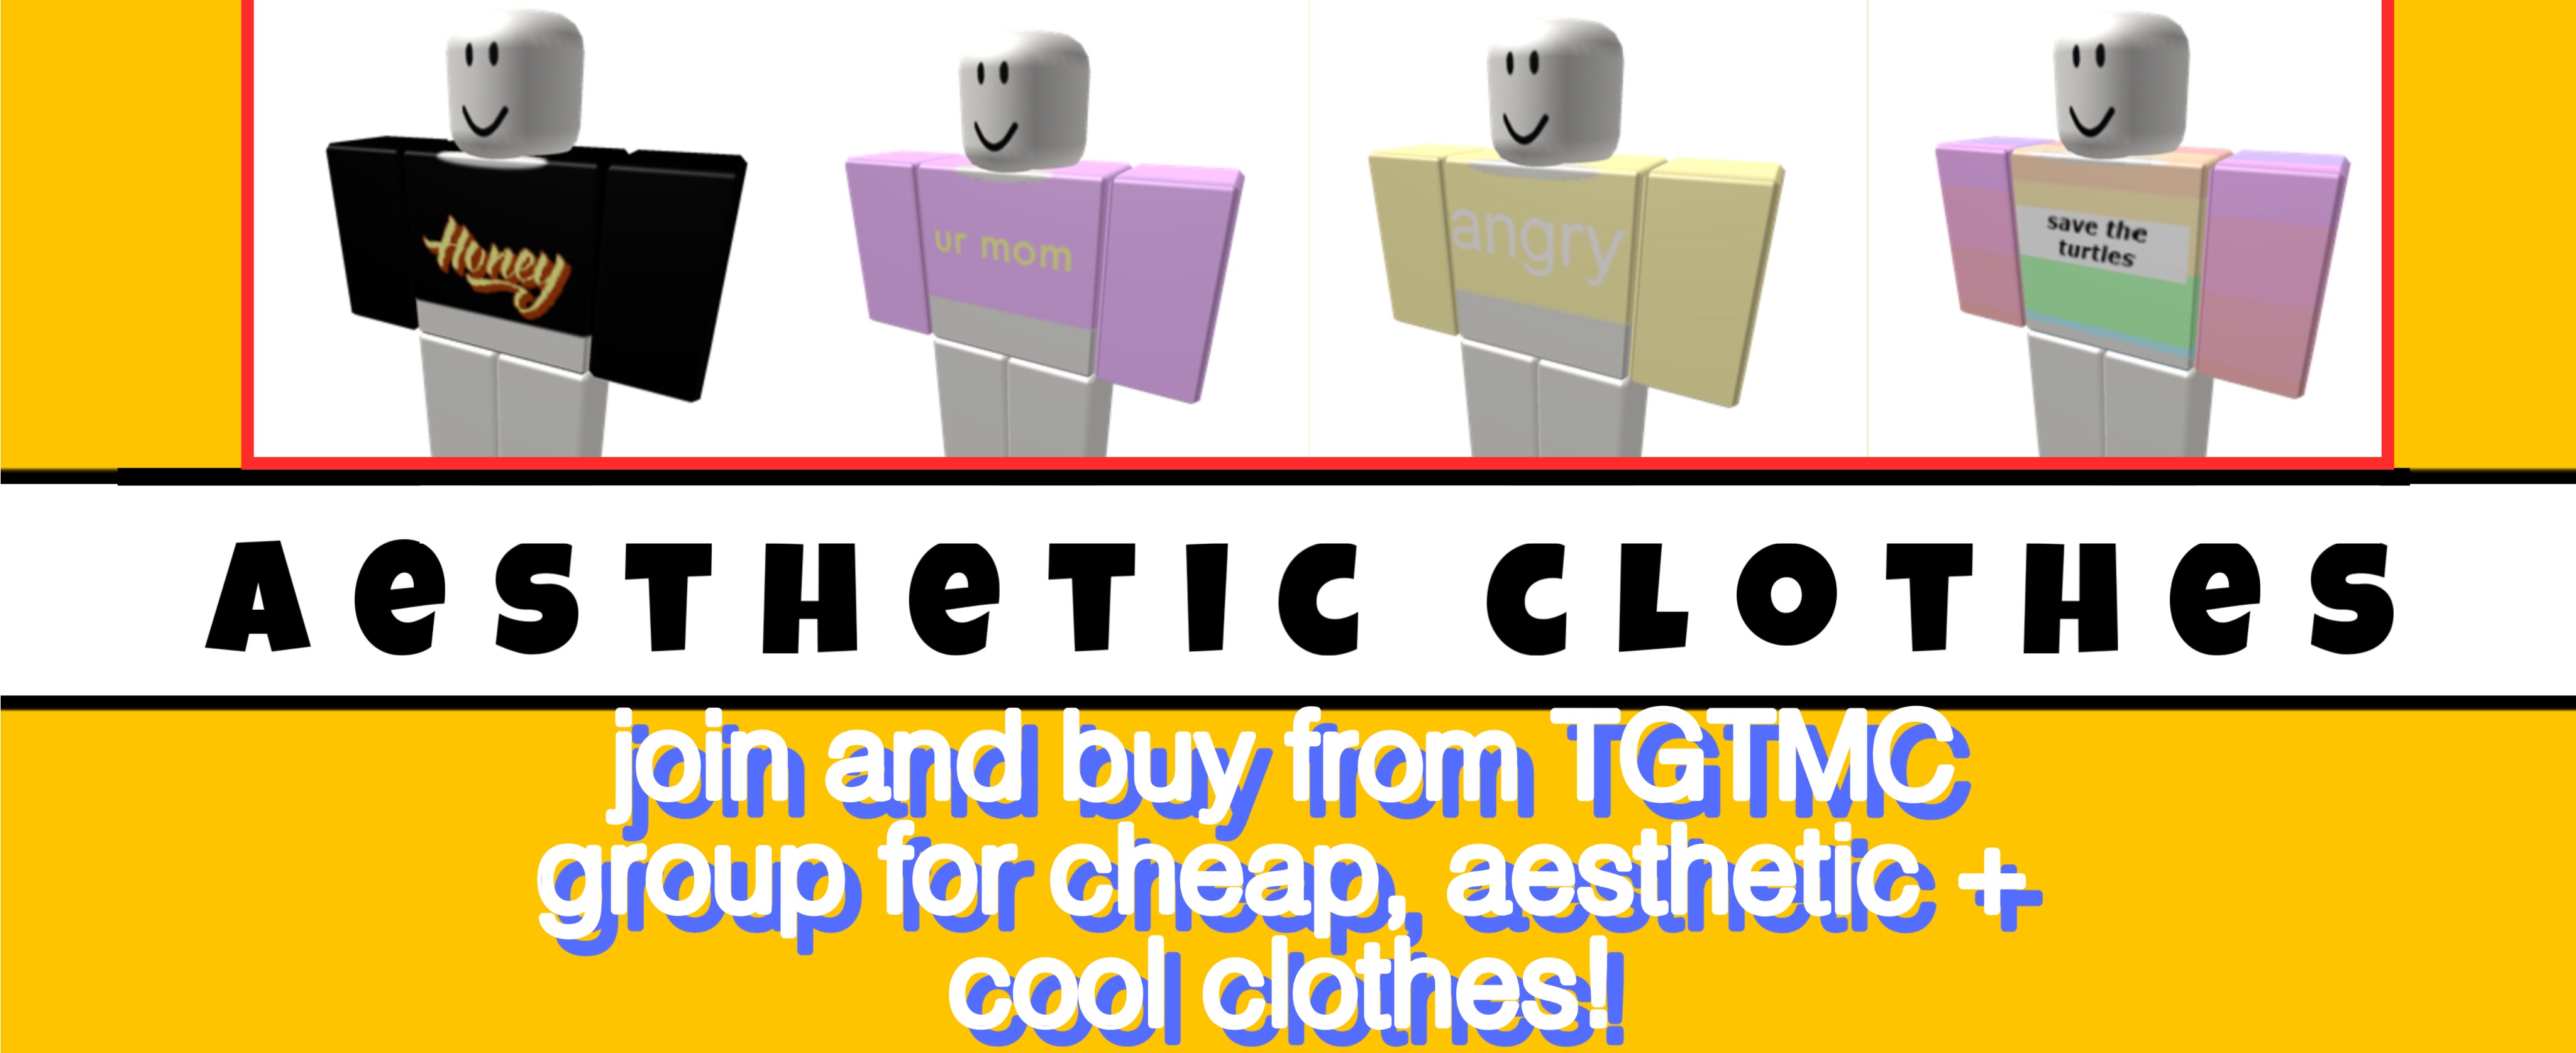 Good Aesthetic Groups Roblox - aesthetic clothing groups on roblox